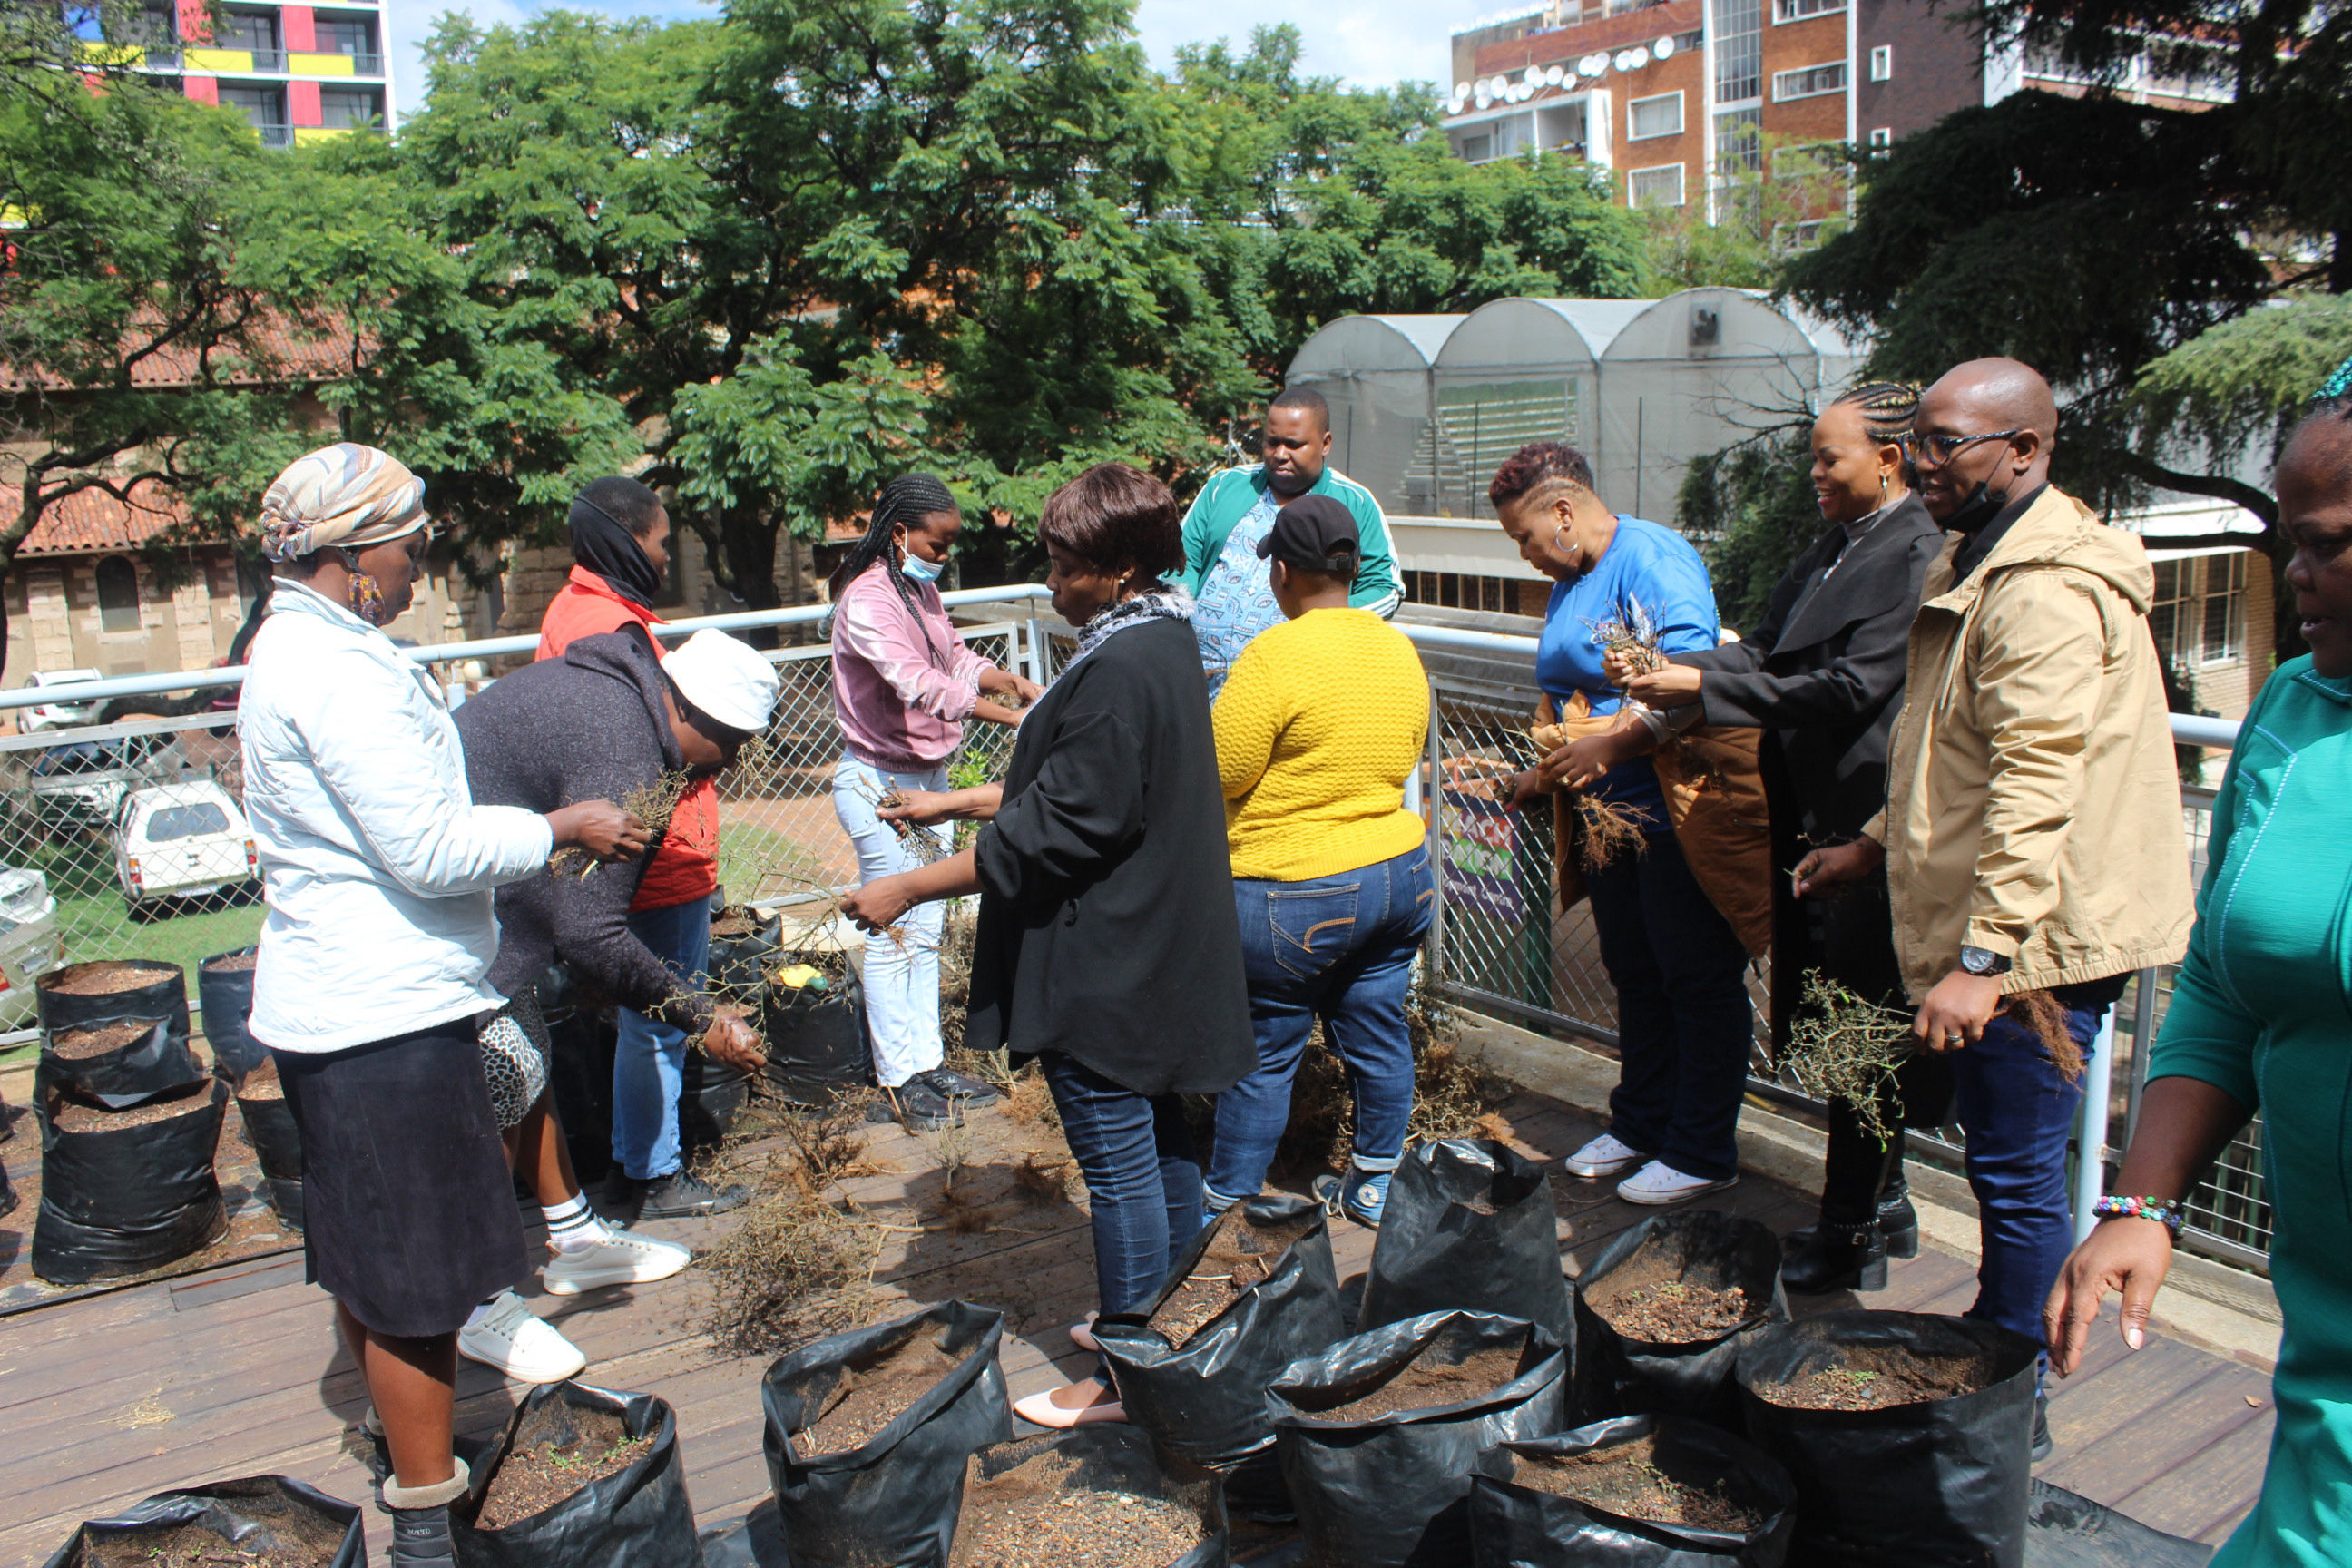 Students learn about plants and planting and more during the Outreach Foundation urban farming/greening course